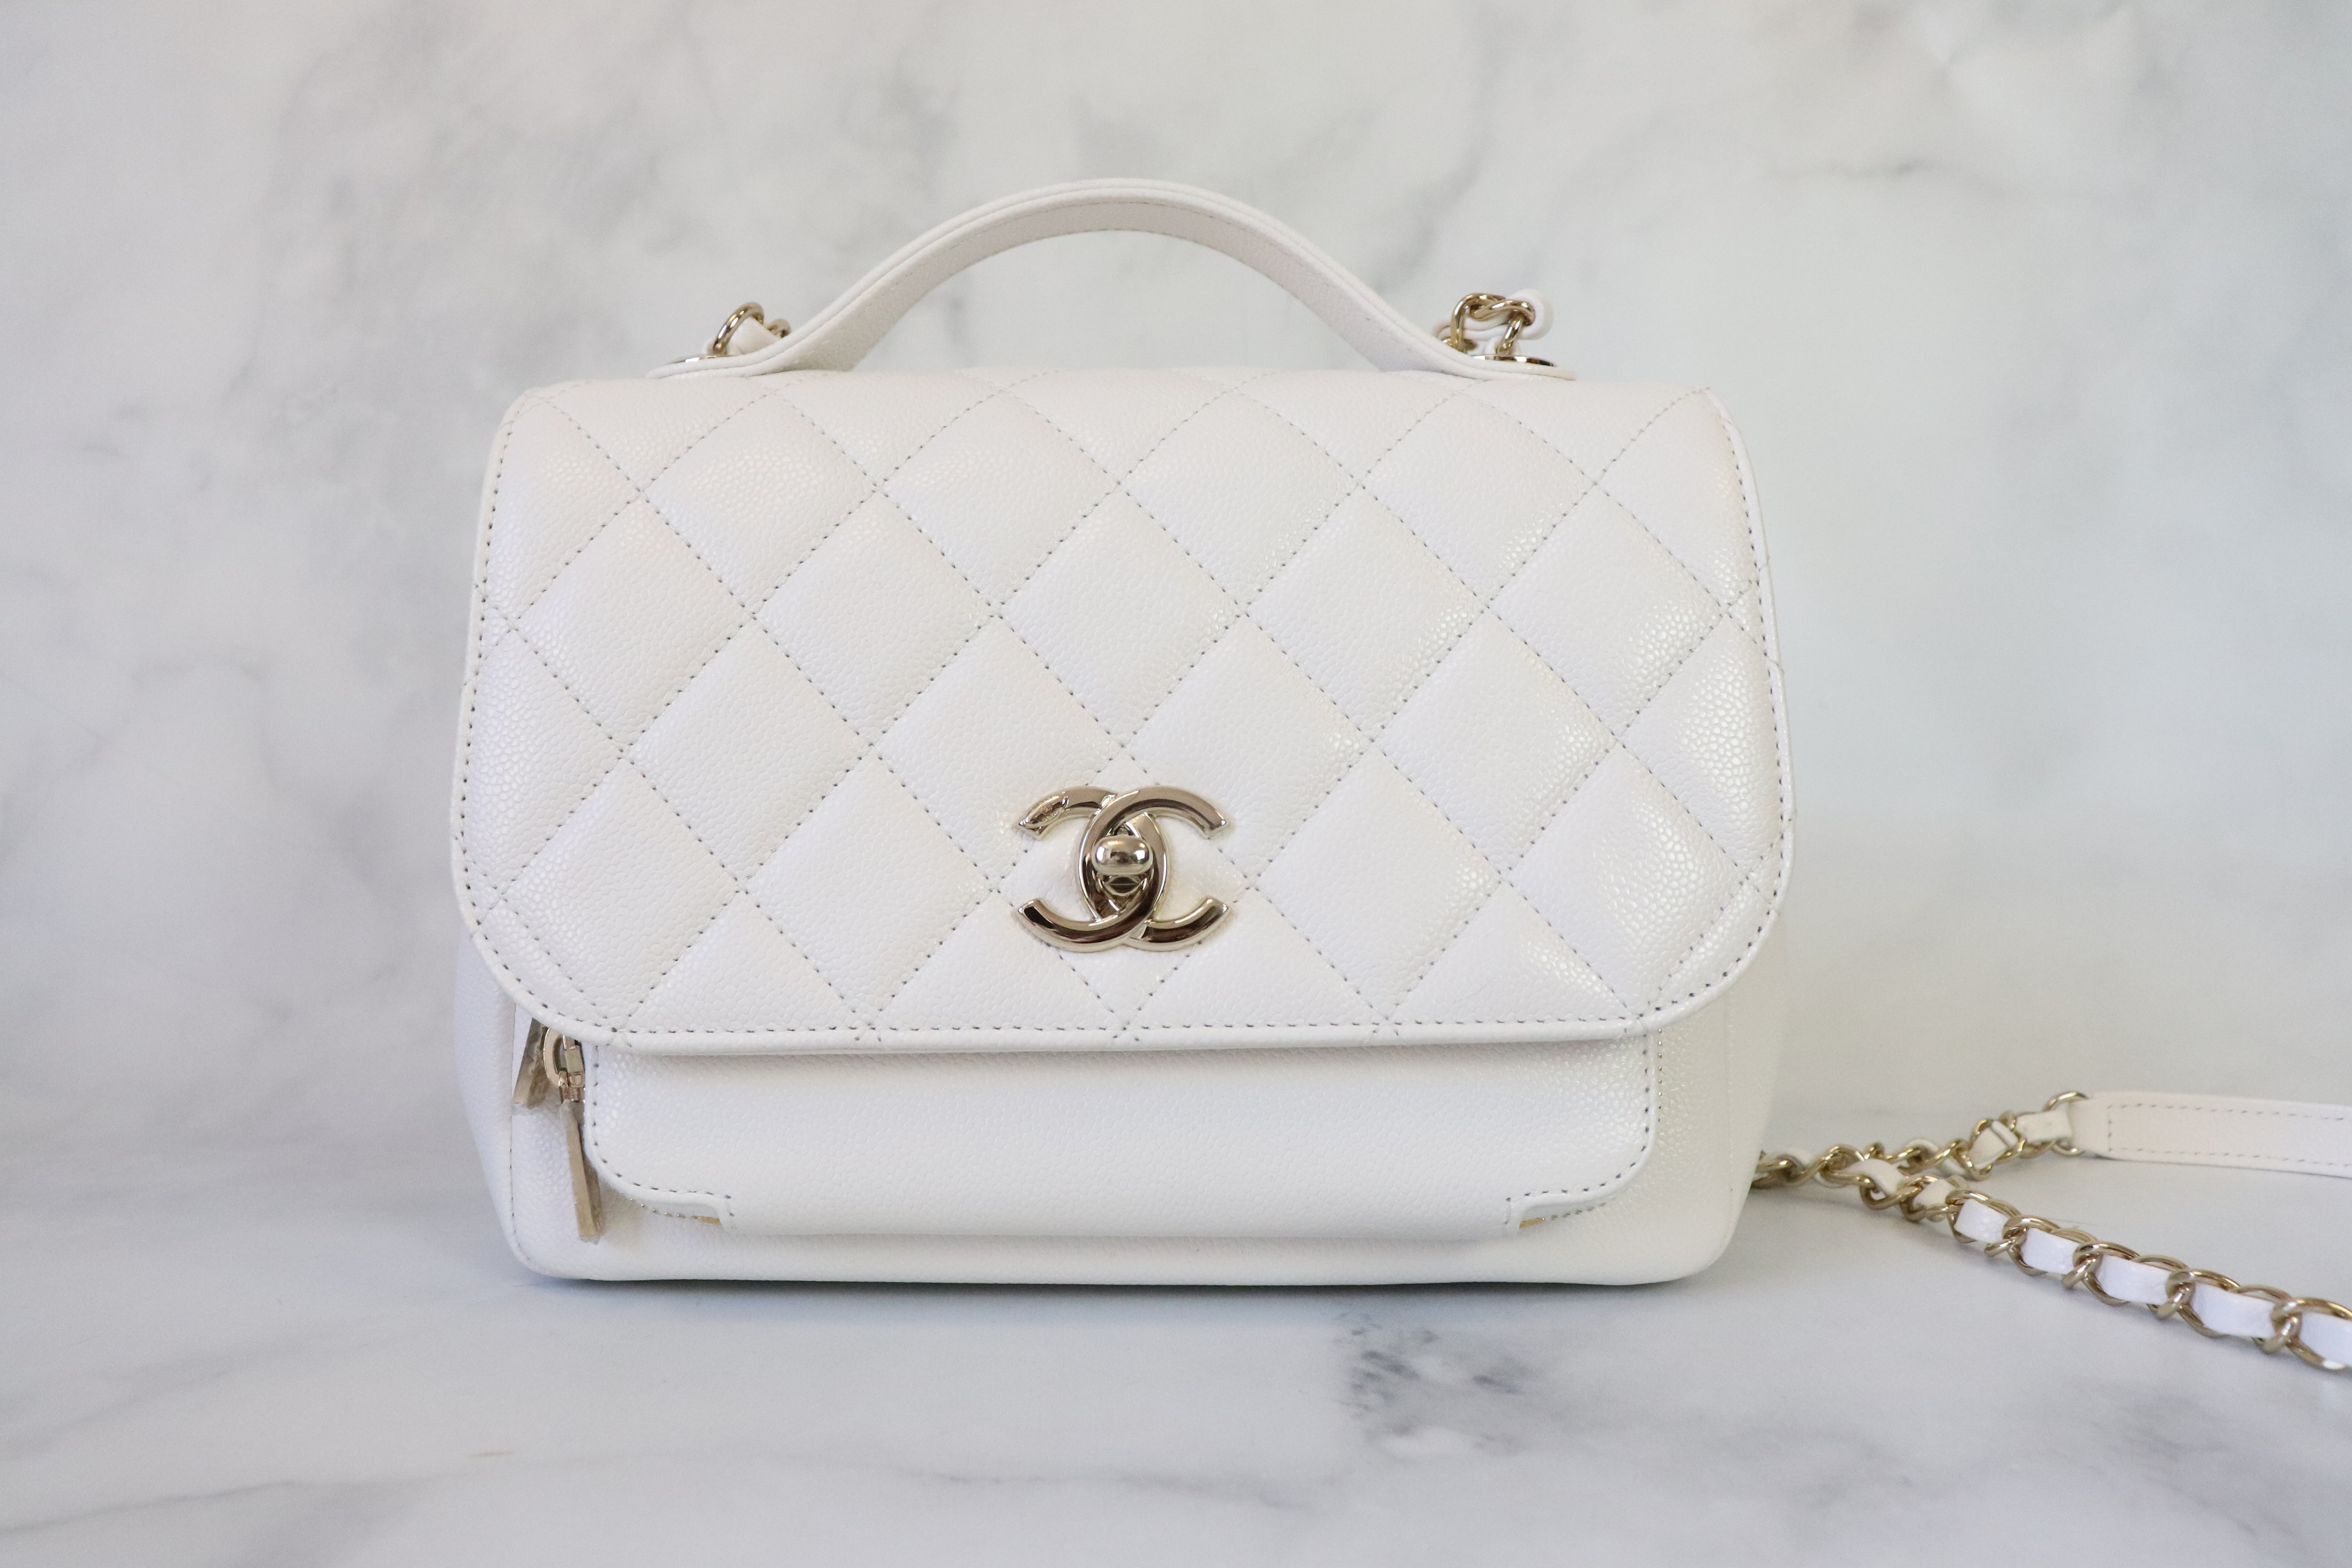 Chanel Business Affinity, Small, White Caviar Leather with Gold